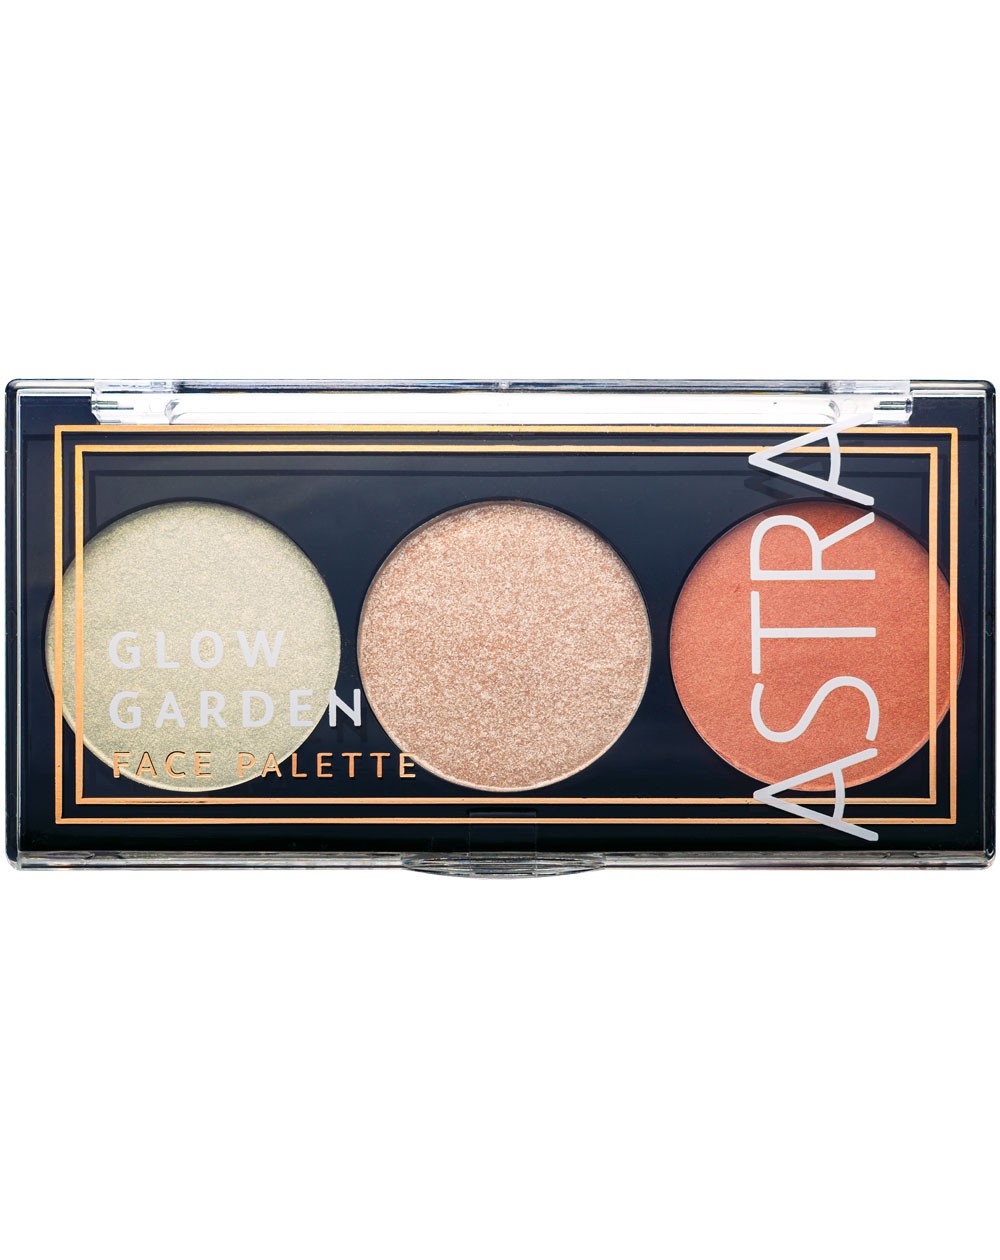 Astra Glow Garden Face Palette - RossoLaccaStore